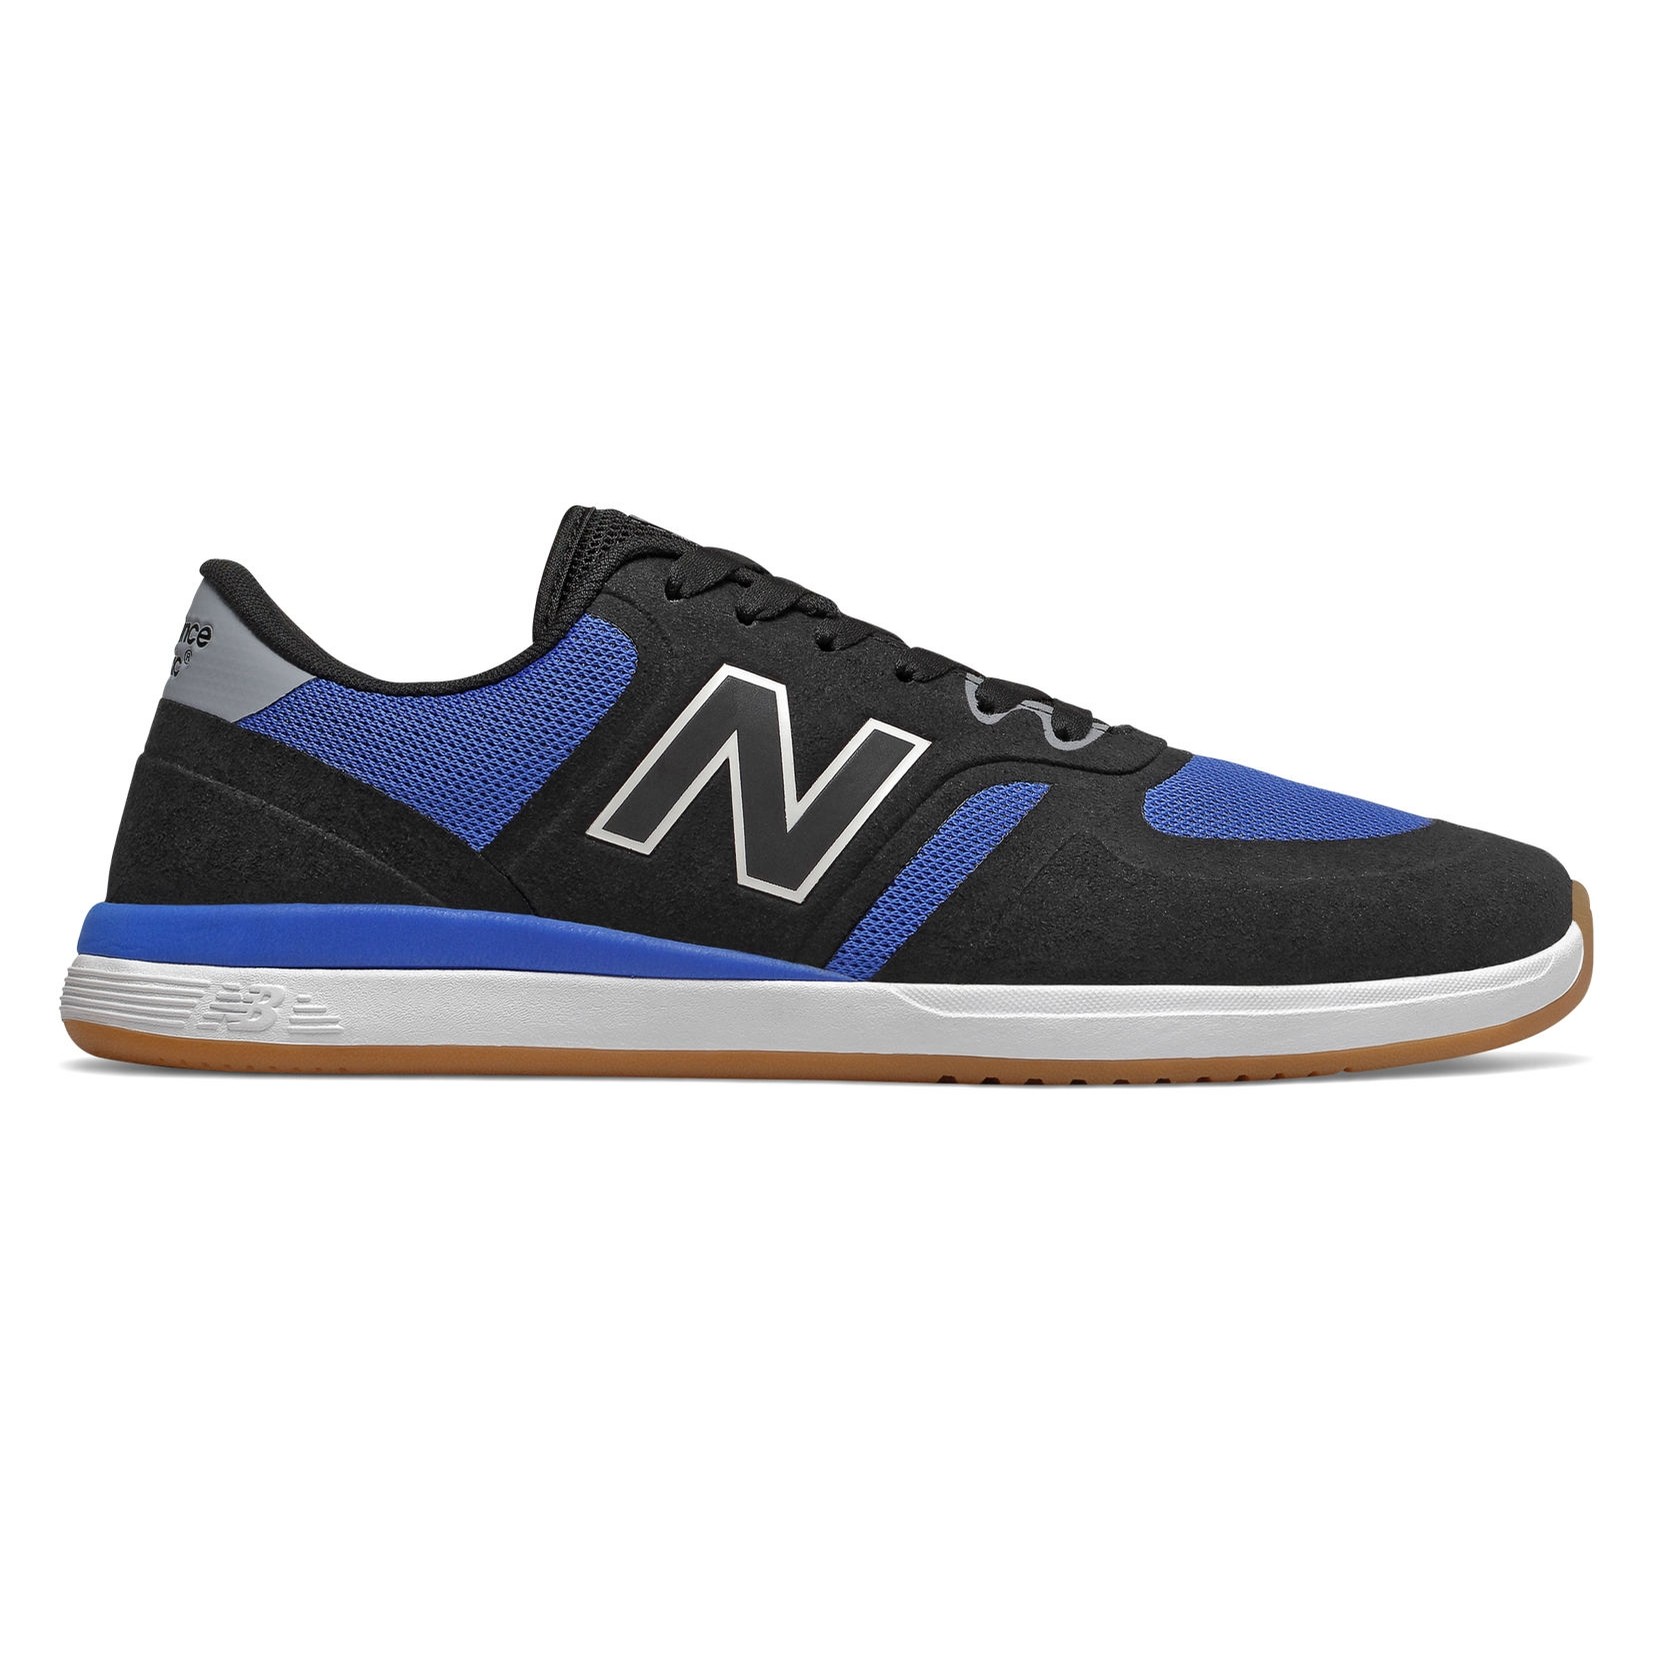 New Balance Numeric 420 (Black/Blue) Men's Shoes Skate Shoes at Switch ...